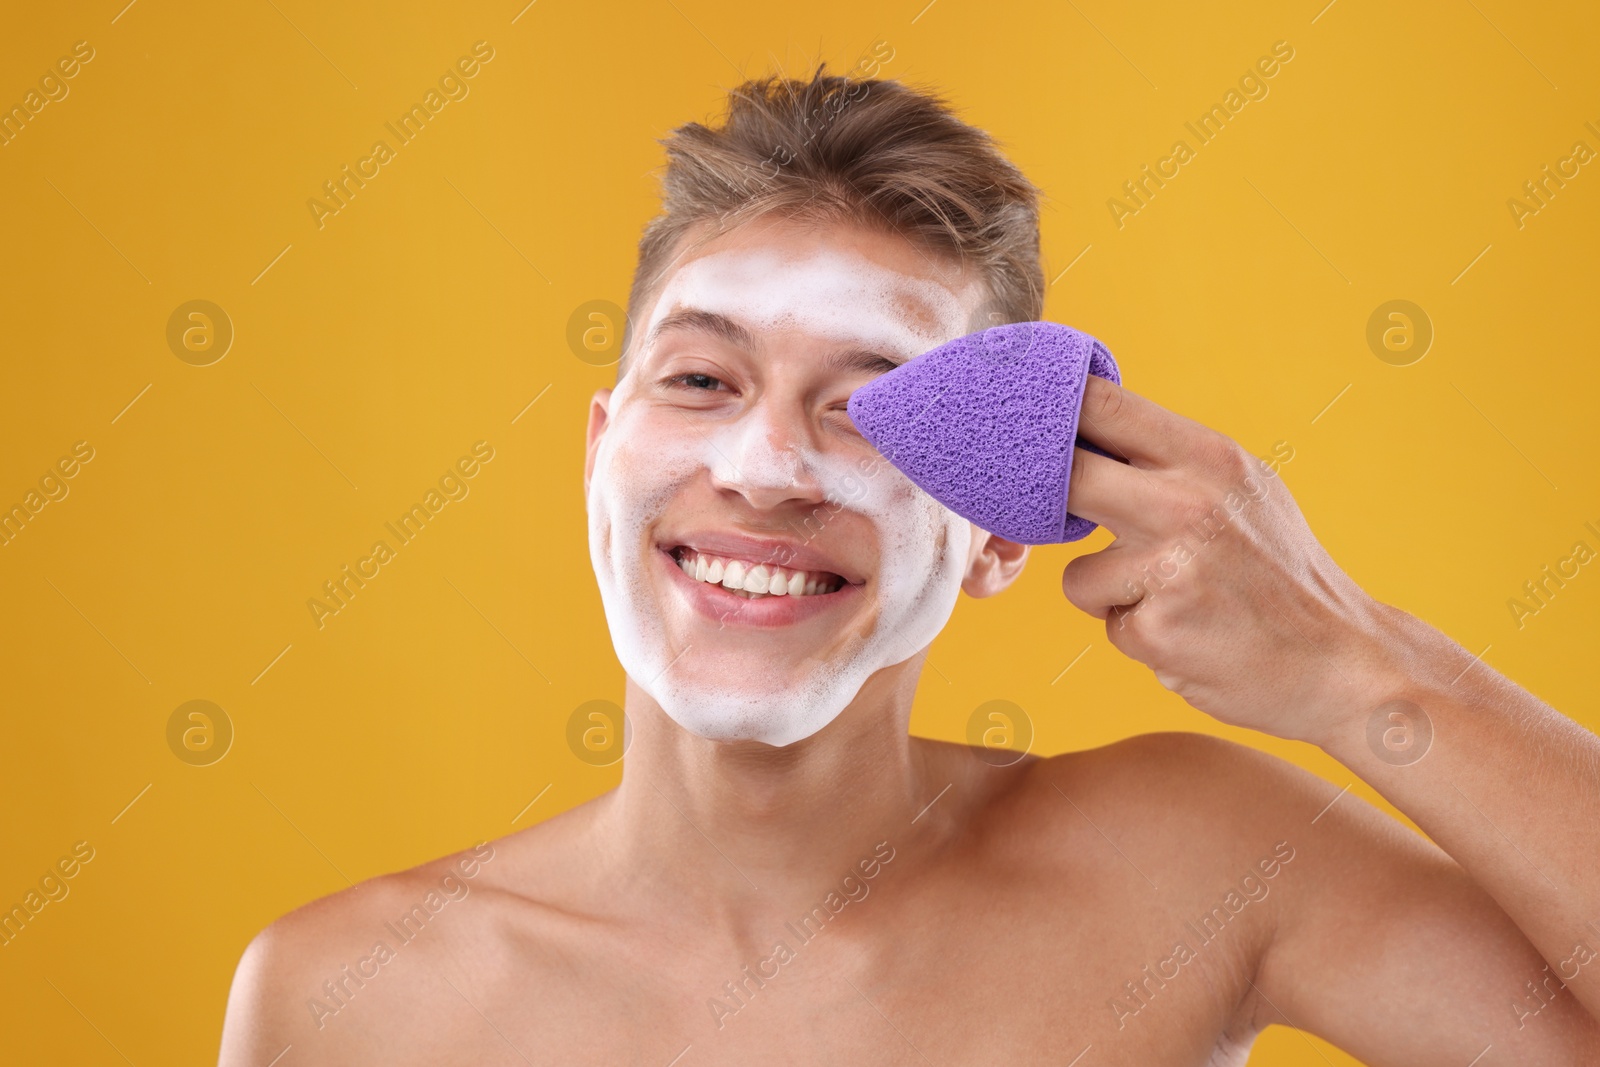 Photo of Happy young man washing his face with sponge on orange background